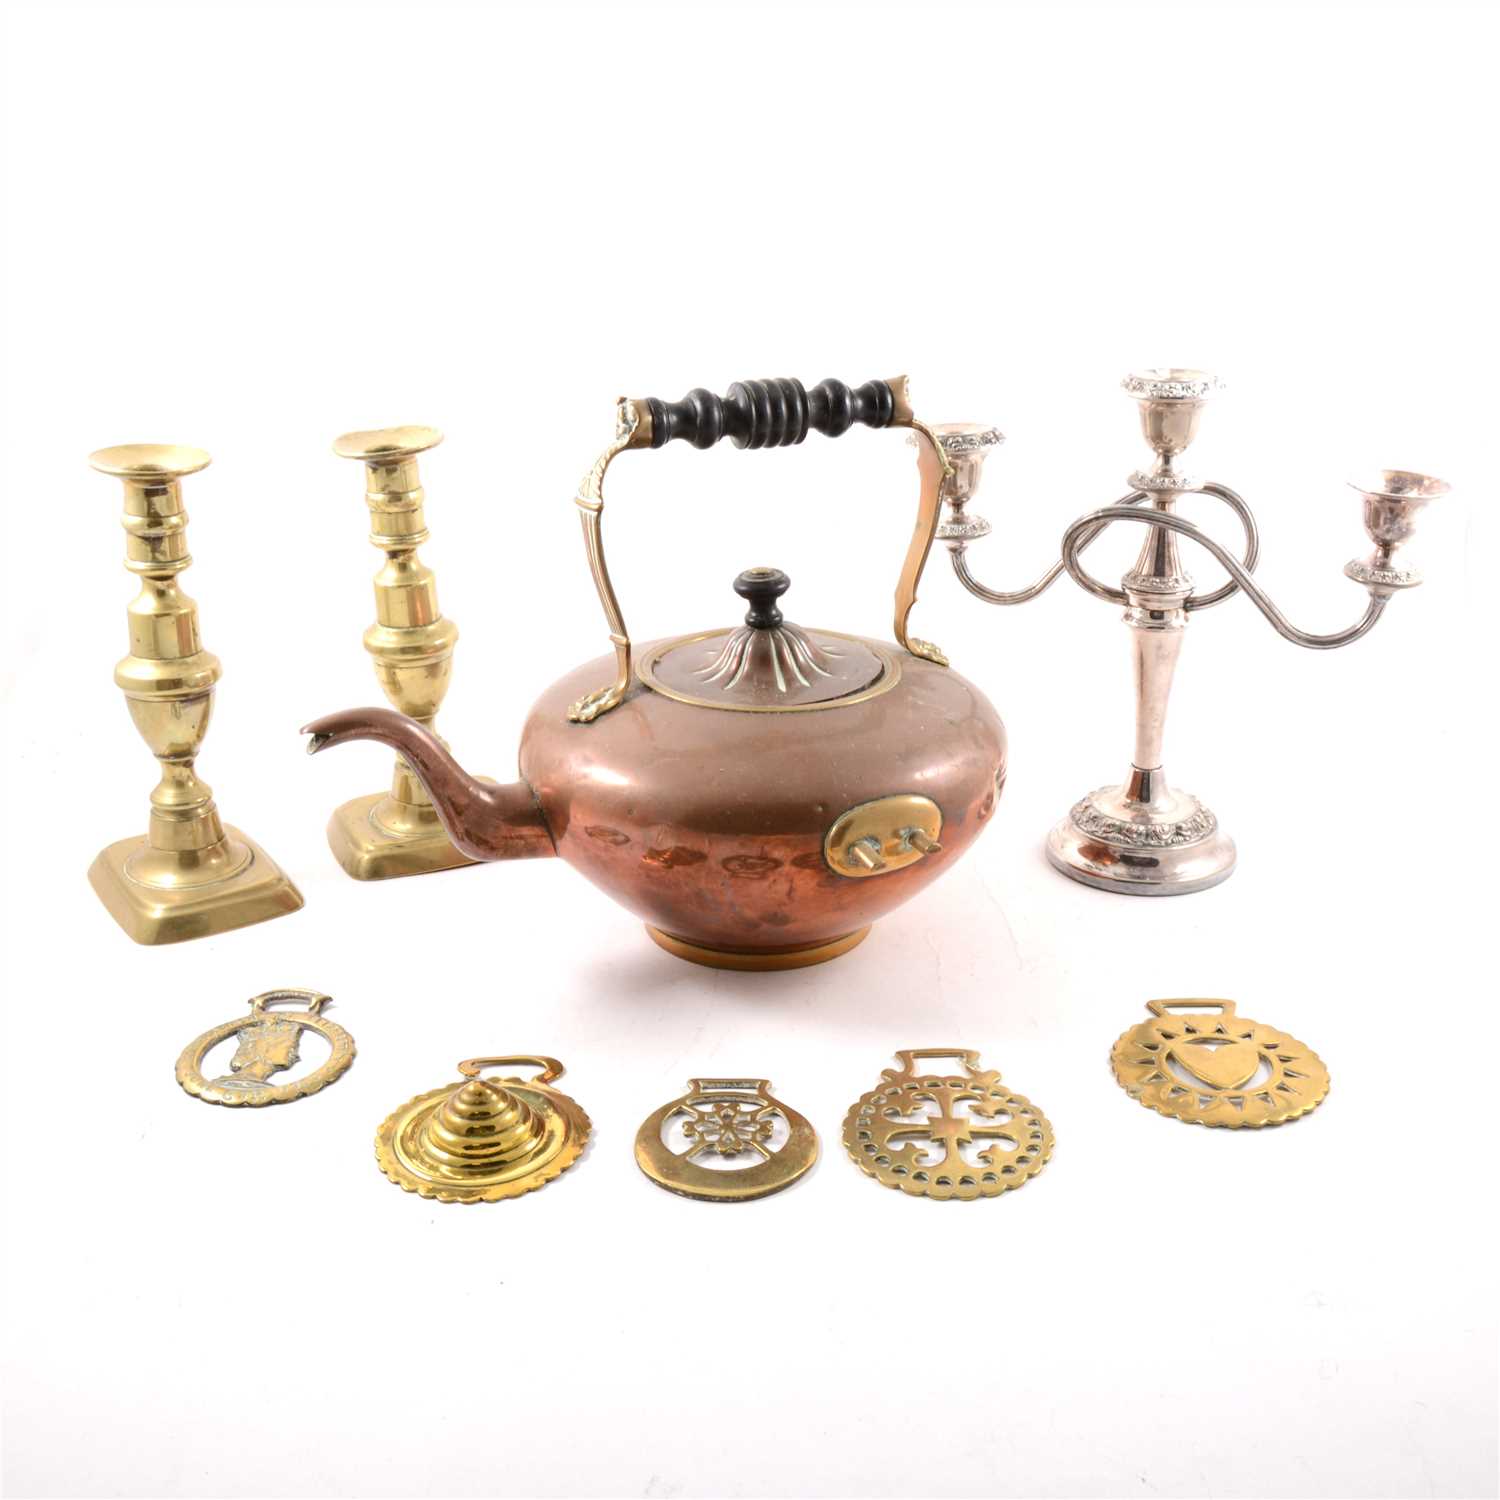 Lot 129 - A copper kettle on a stand, copper warming pan, copper coal bucket, candlesticks, brasses etc.